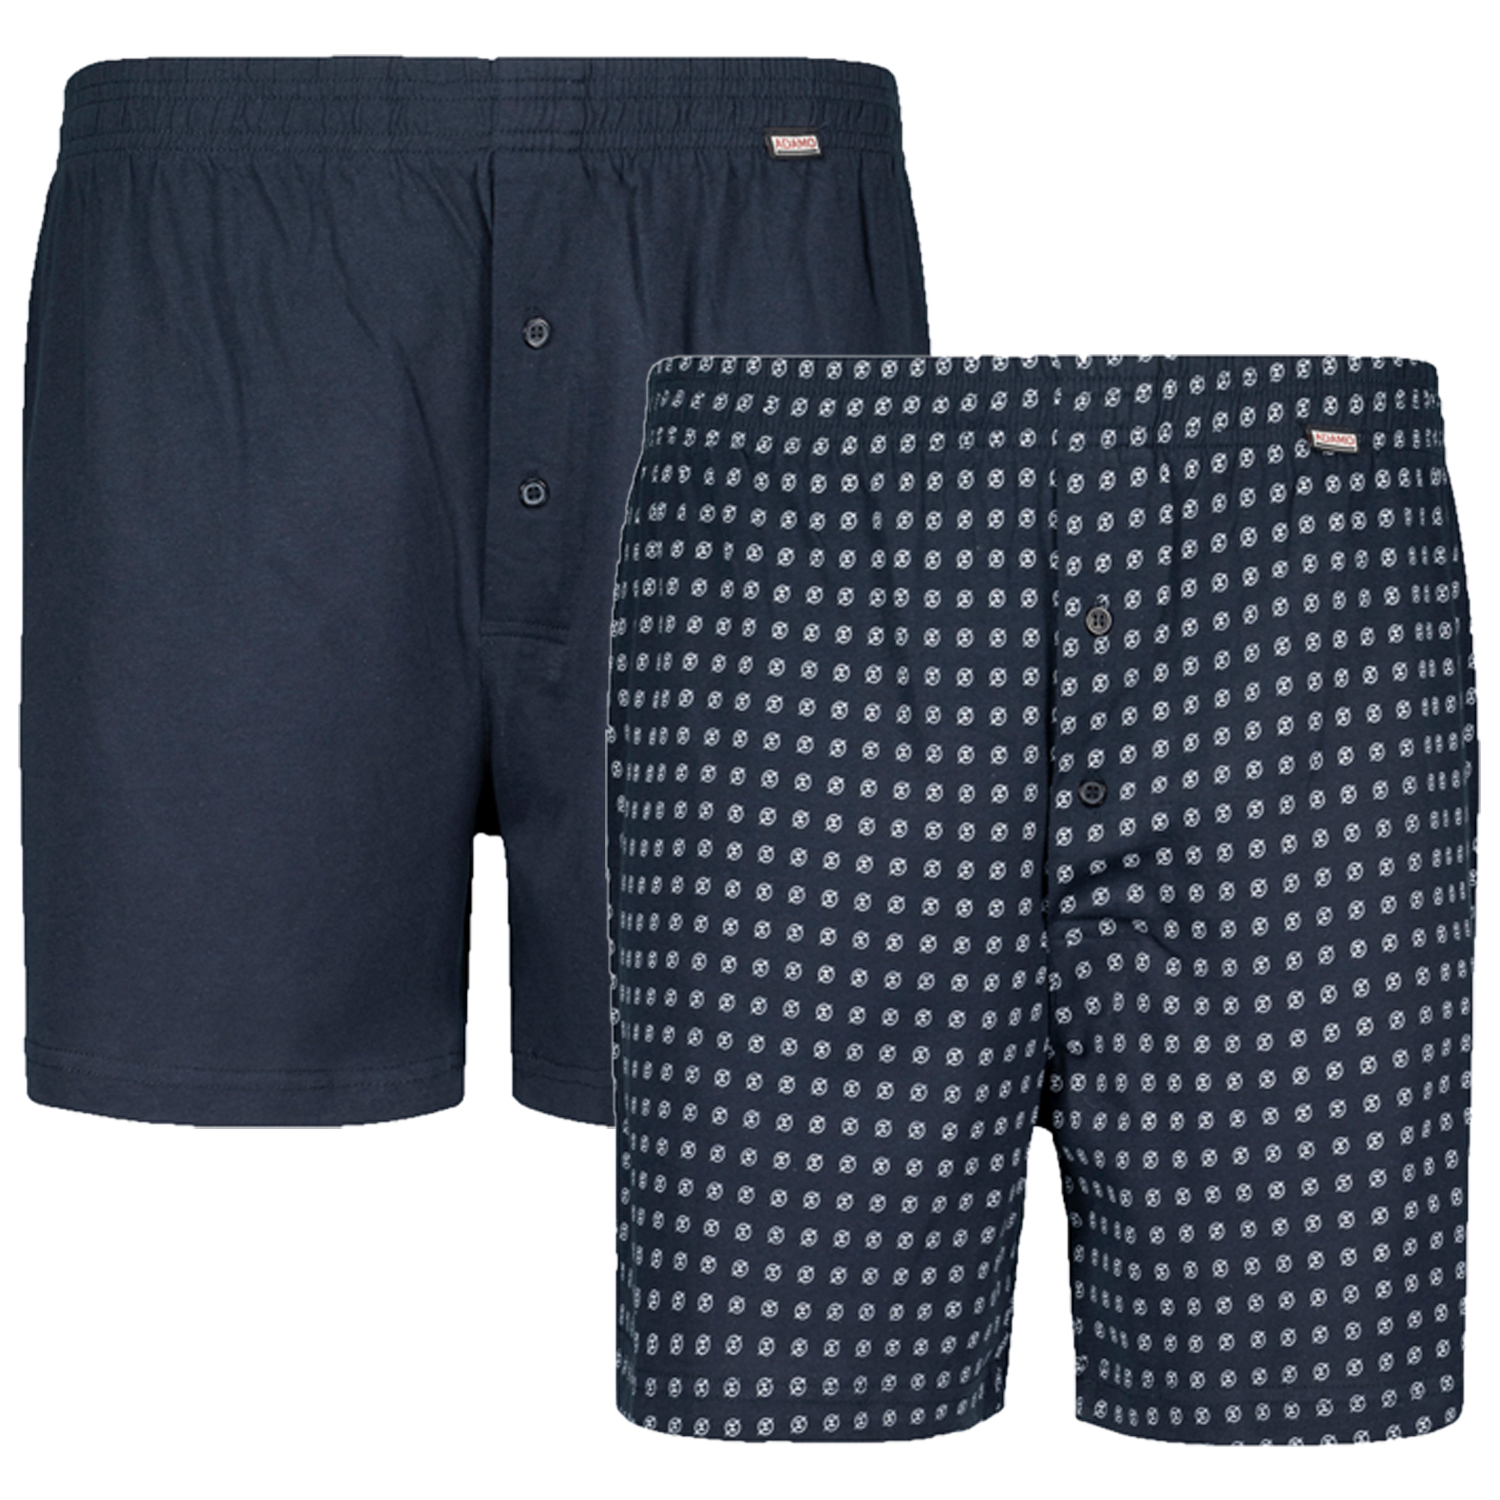 Dark blue DEAN boxershorts by ADAMO in oversizes up to 32 (double pack)